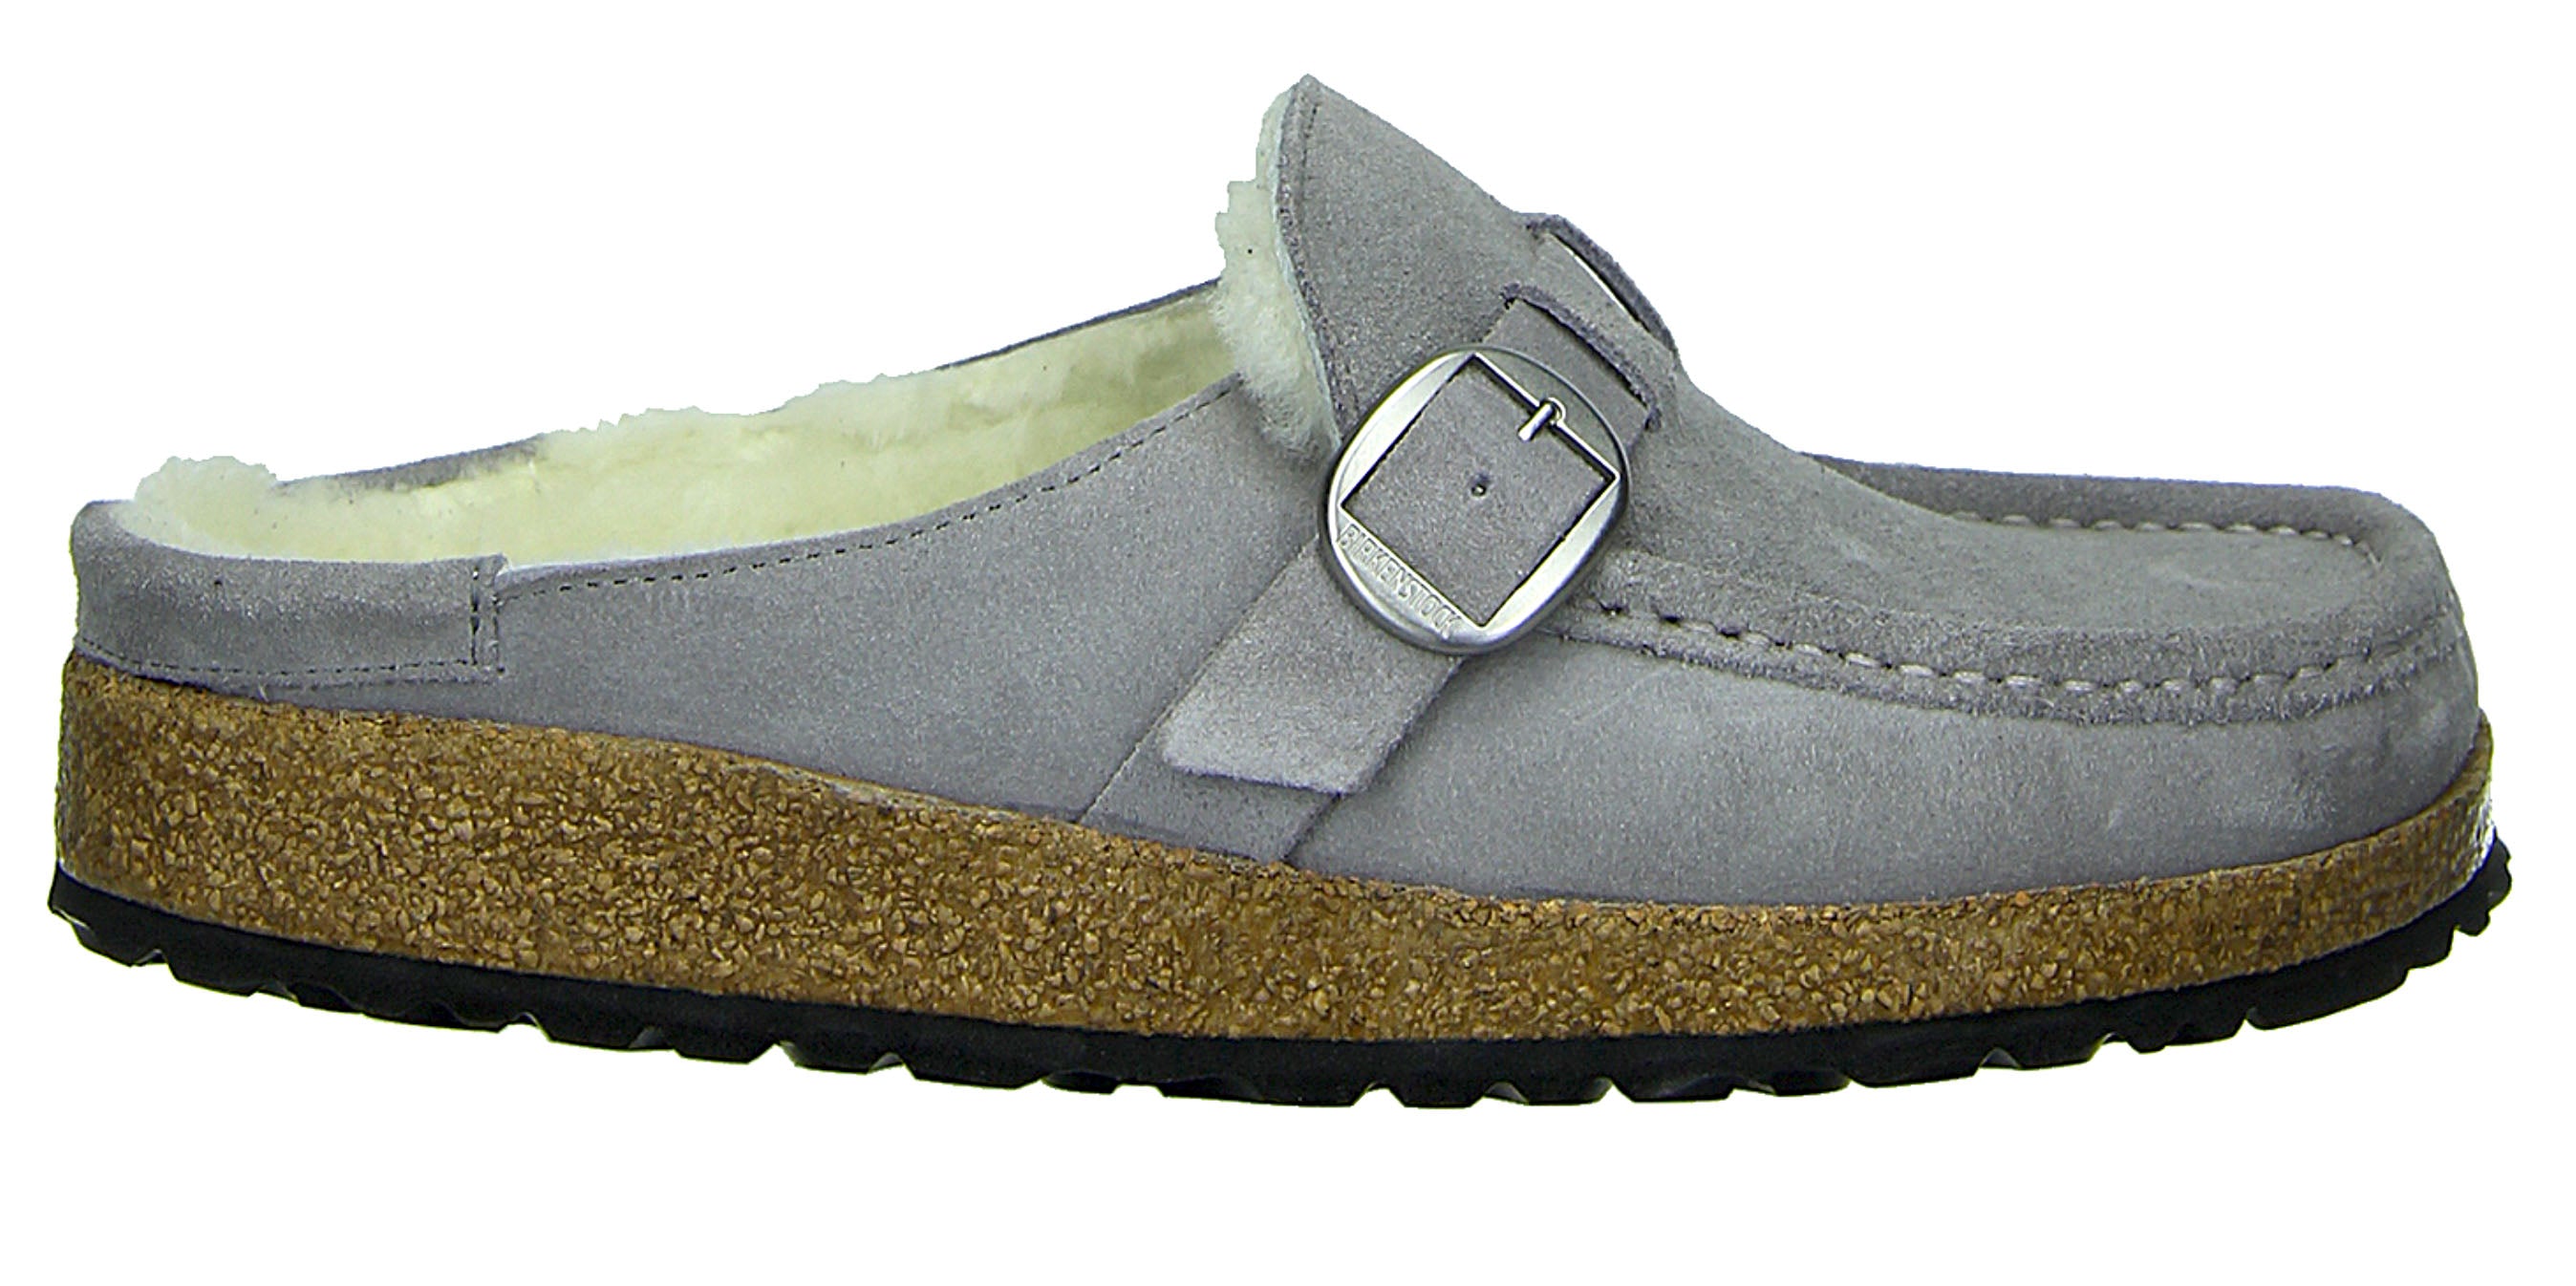 Birkenstock Buckley Shearling Suede Leather Cozy Clogs Slippers Moccasin Mules - Bartel-Shop